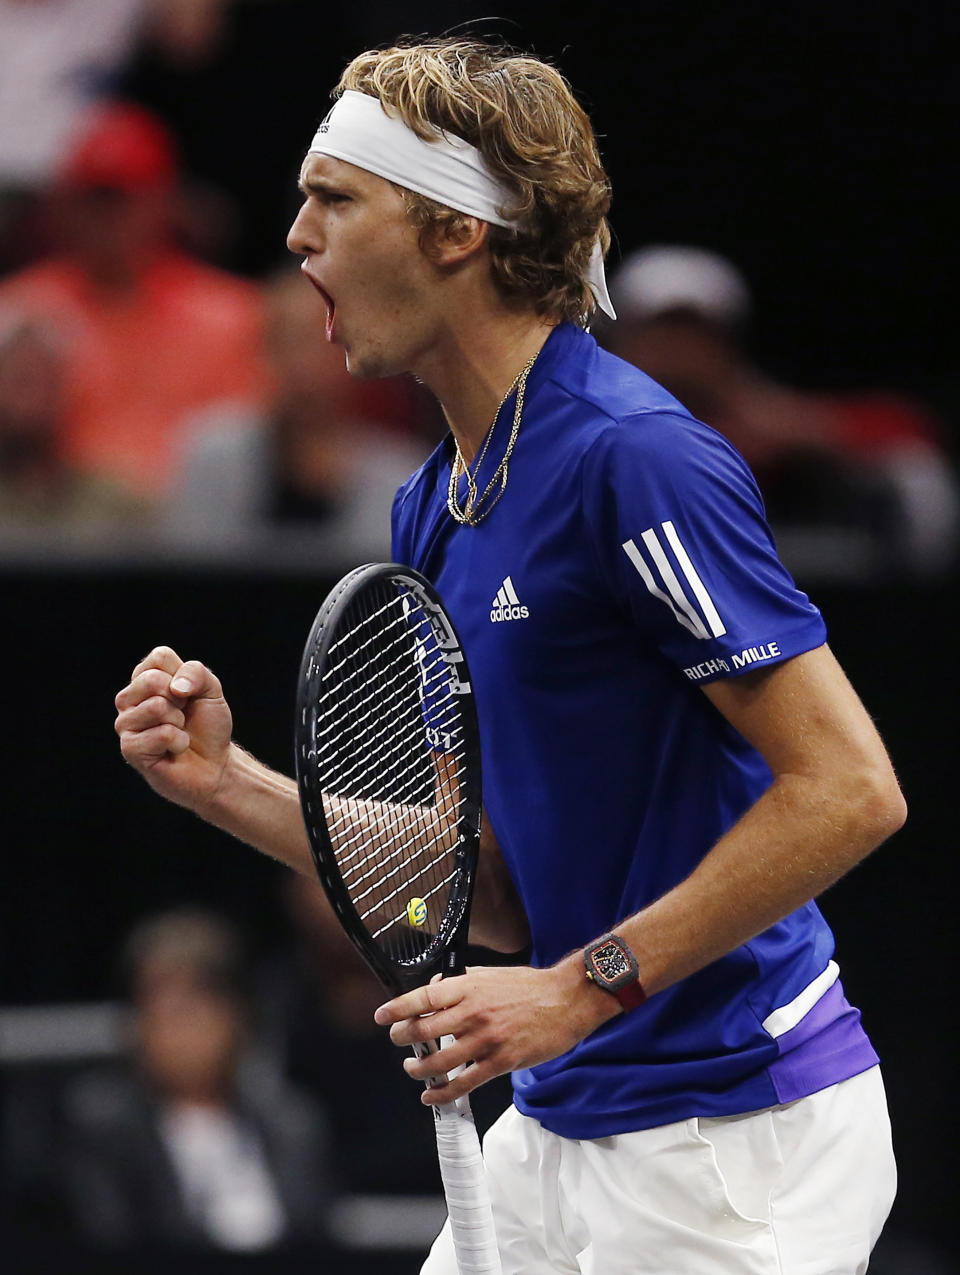 Team Europe's Alexander Zverev celebrates a point against Team World's Kevin Anderson during a men's singles tennis match at the the Laver Cup, Sunday, Sept. 23, 2018, in Chicago. (AP Photo/Jim Young)